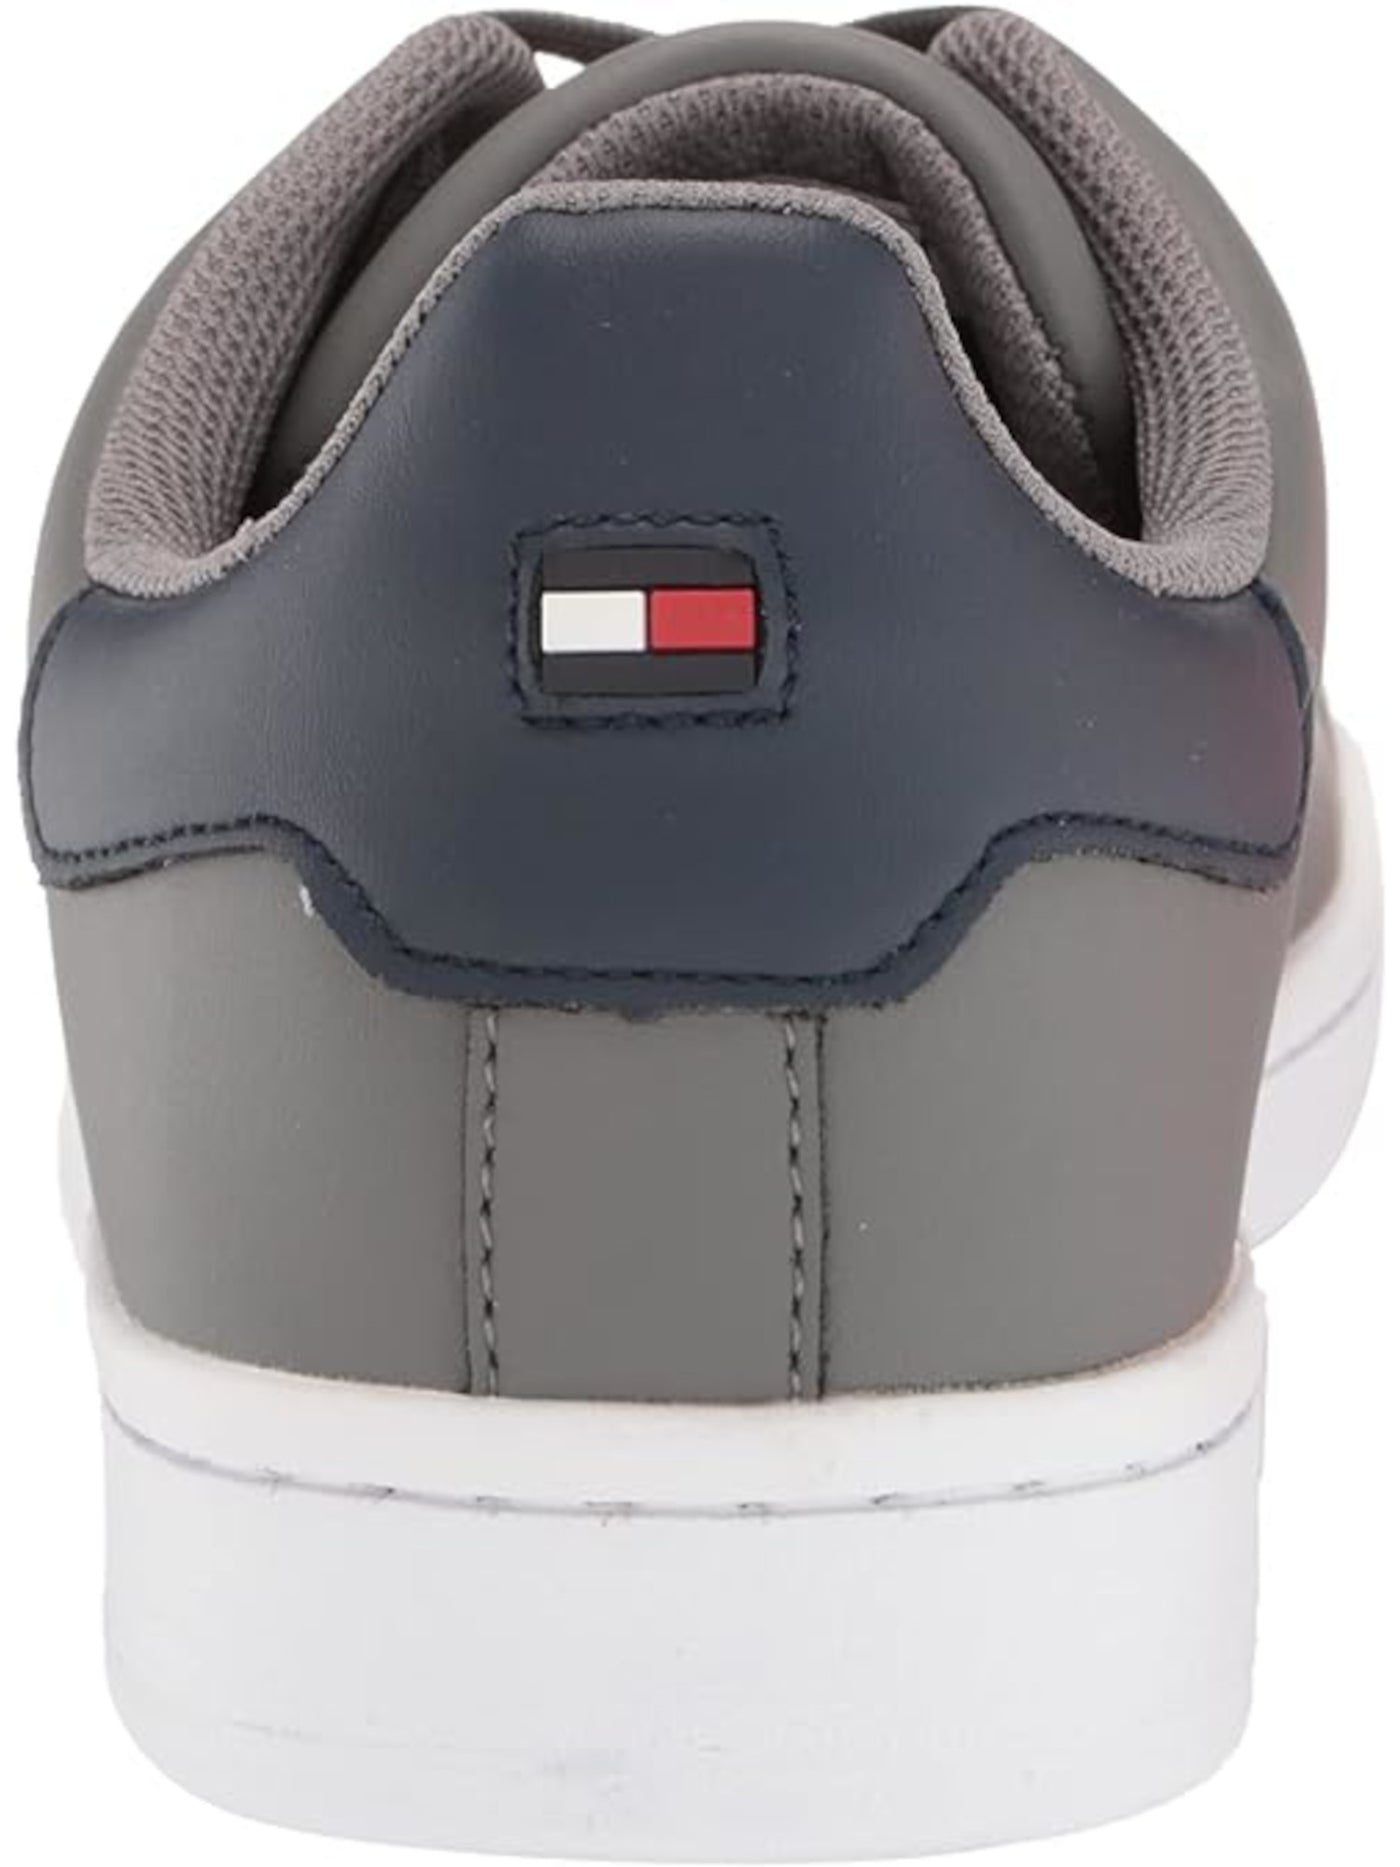 TOMMY HILFIGER Mens Gray Removable Insole Logo Lampkin Round Toe Platform Lace-Up Sneakers Shoes 7.5 M